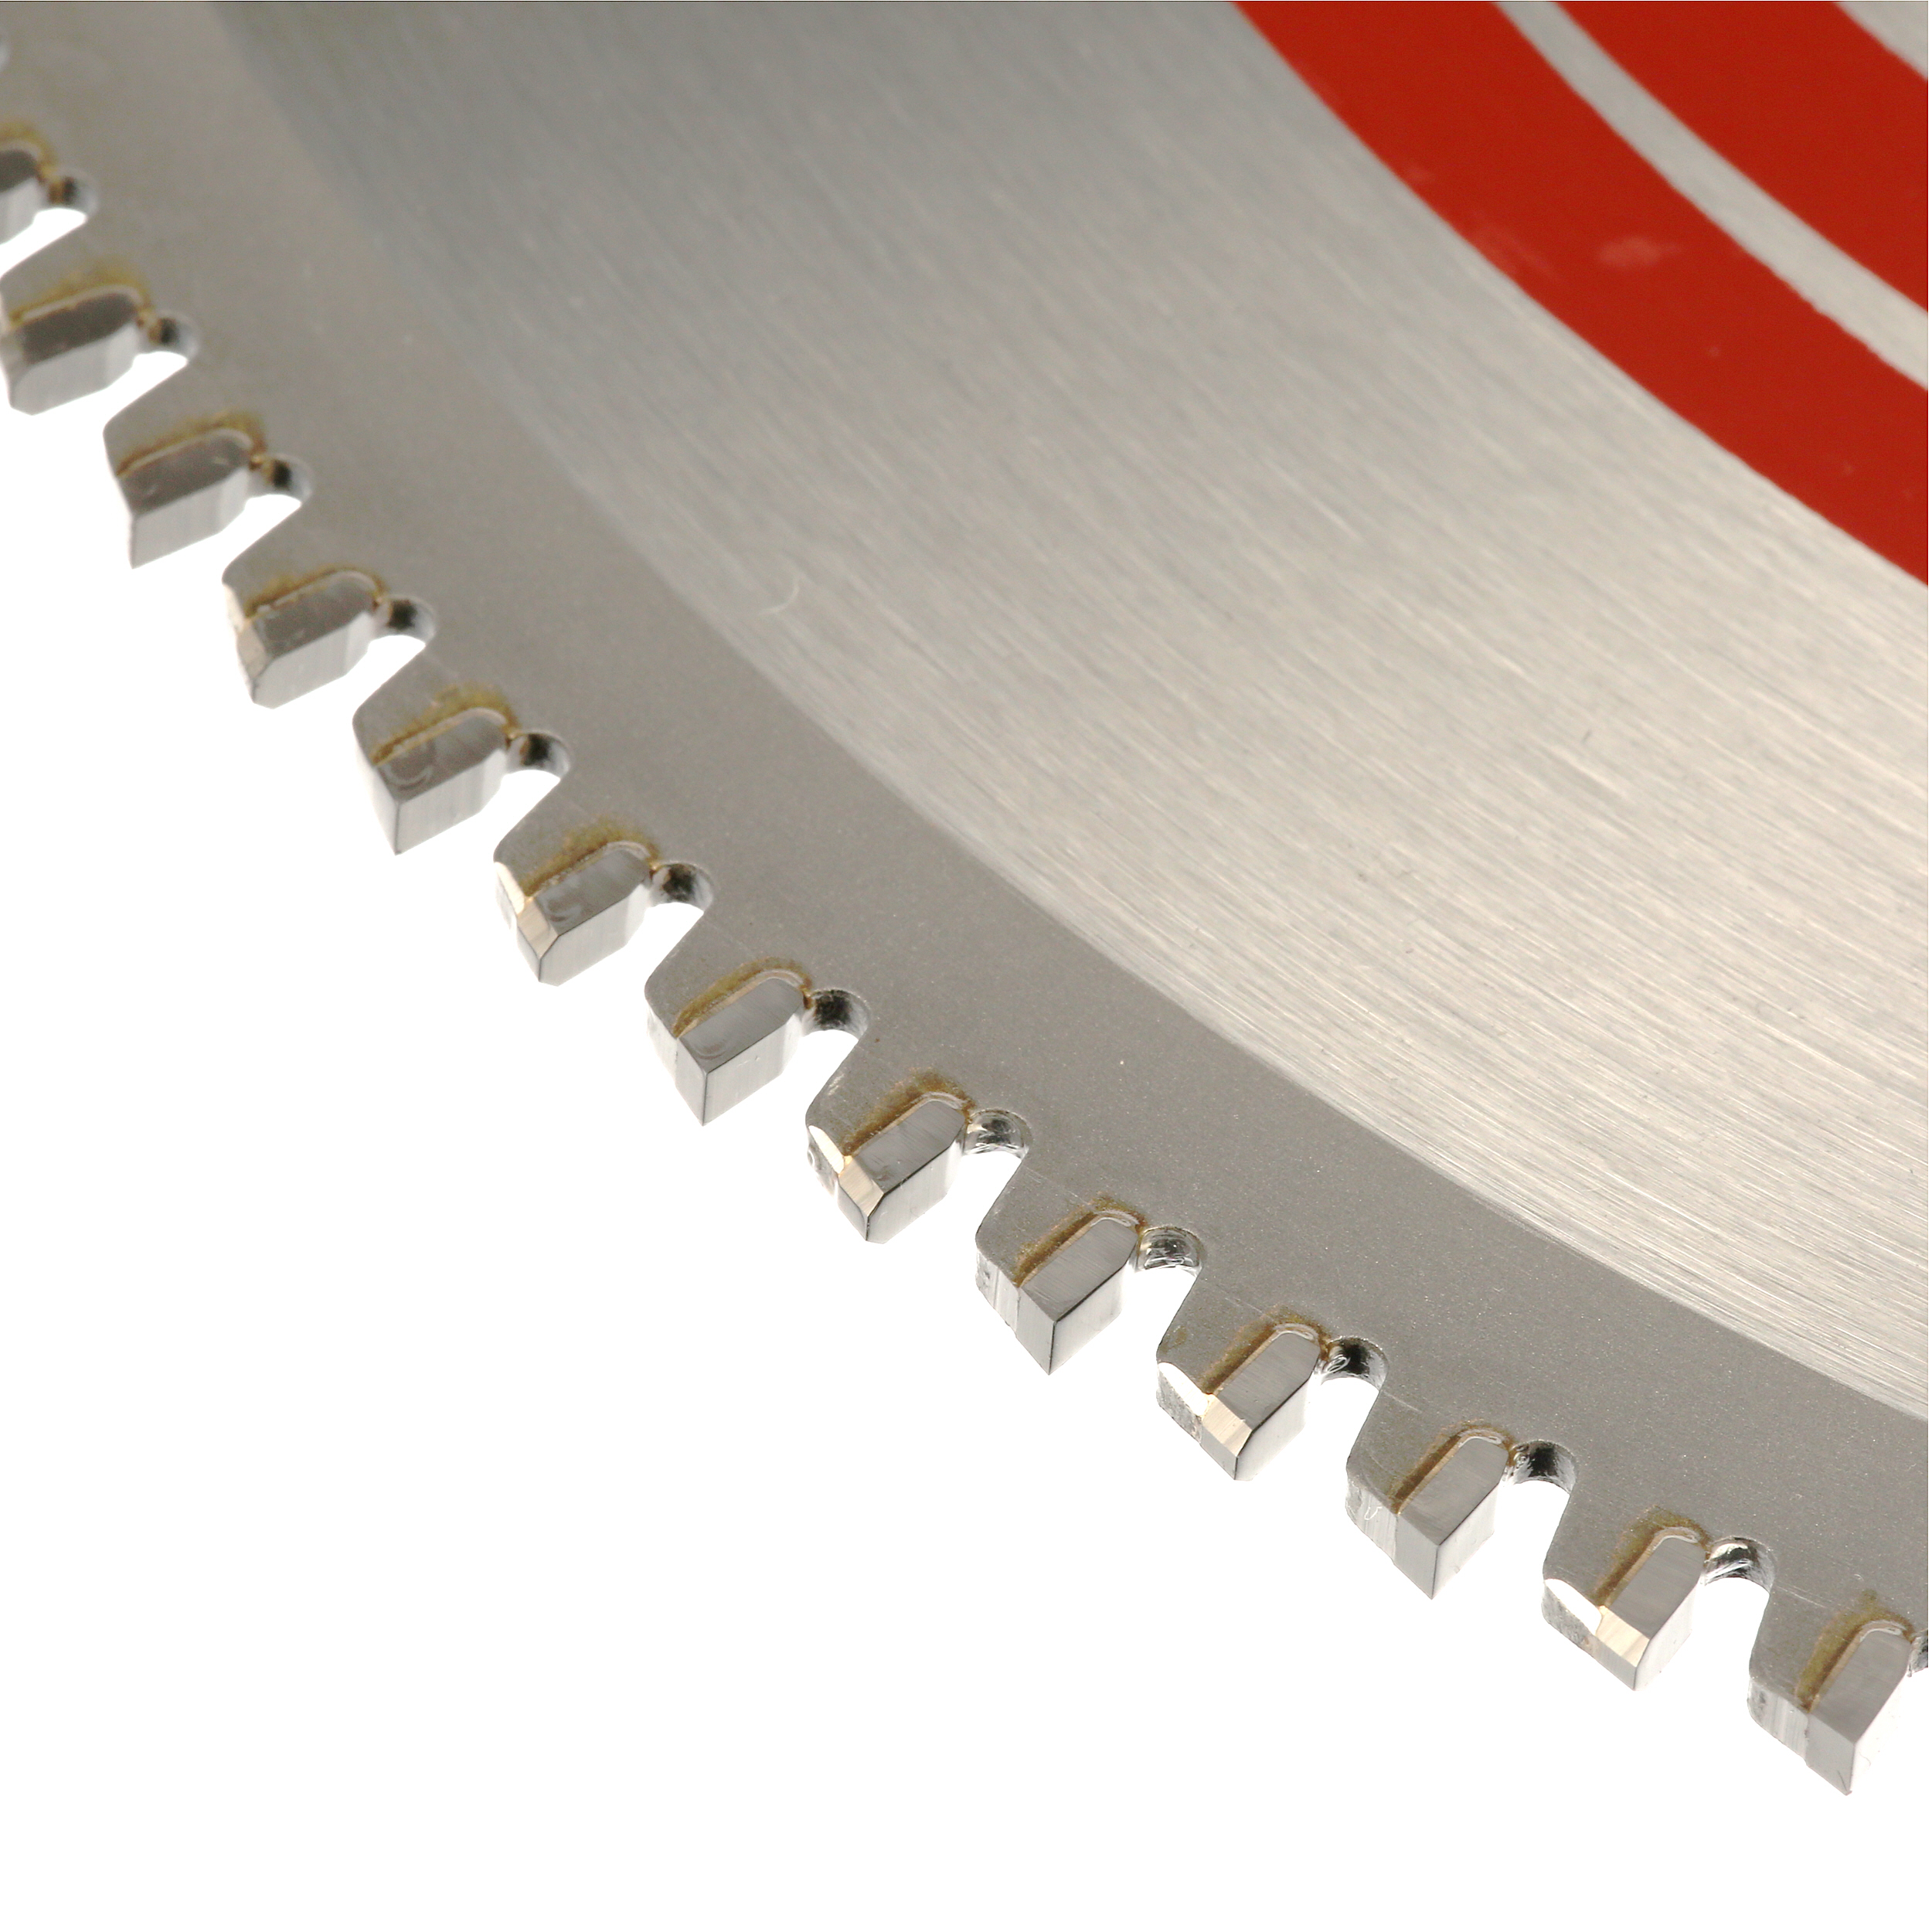 Oshlun SBNF-120120 12-Inch 120 Tooth TCG Saw Blade with 1-Inch Arbor for  Aluminum and Non Ferrous Metals